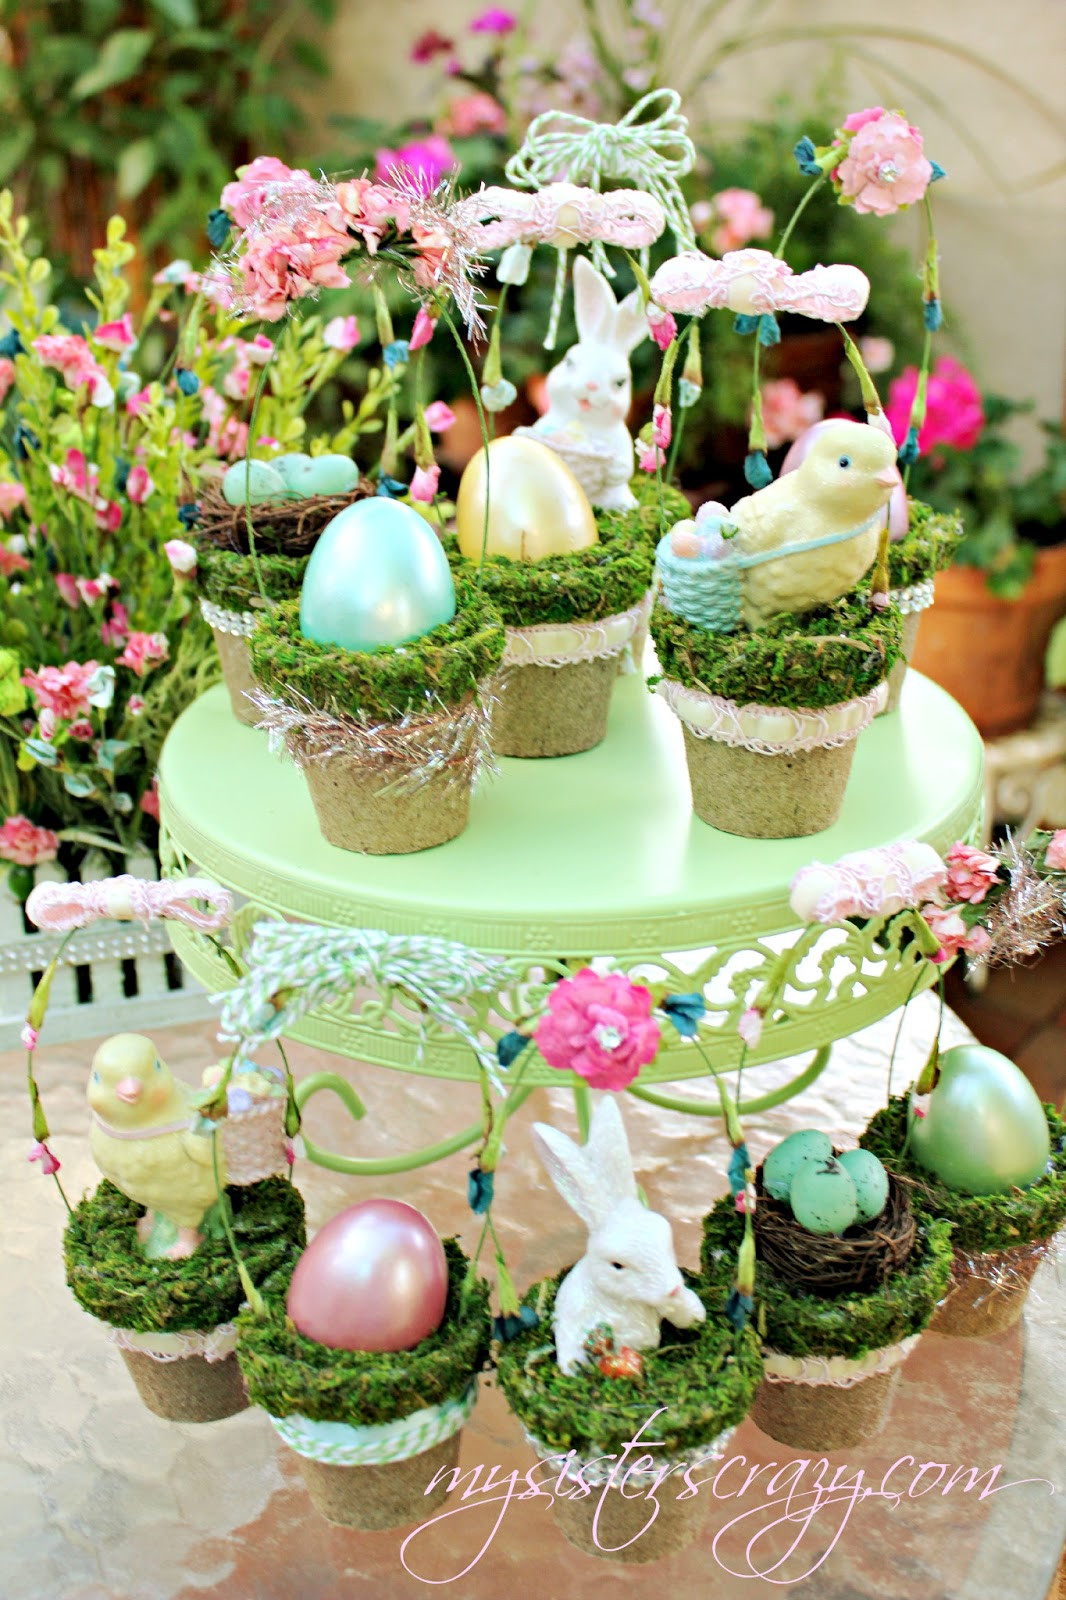 Easter Basket Decorating Ideas
 My Sister s Crazy DECORATING WITH SPRING AND EASTER CRAFTS